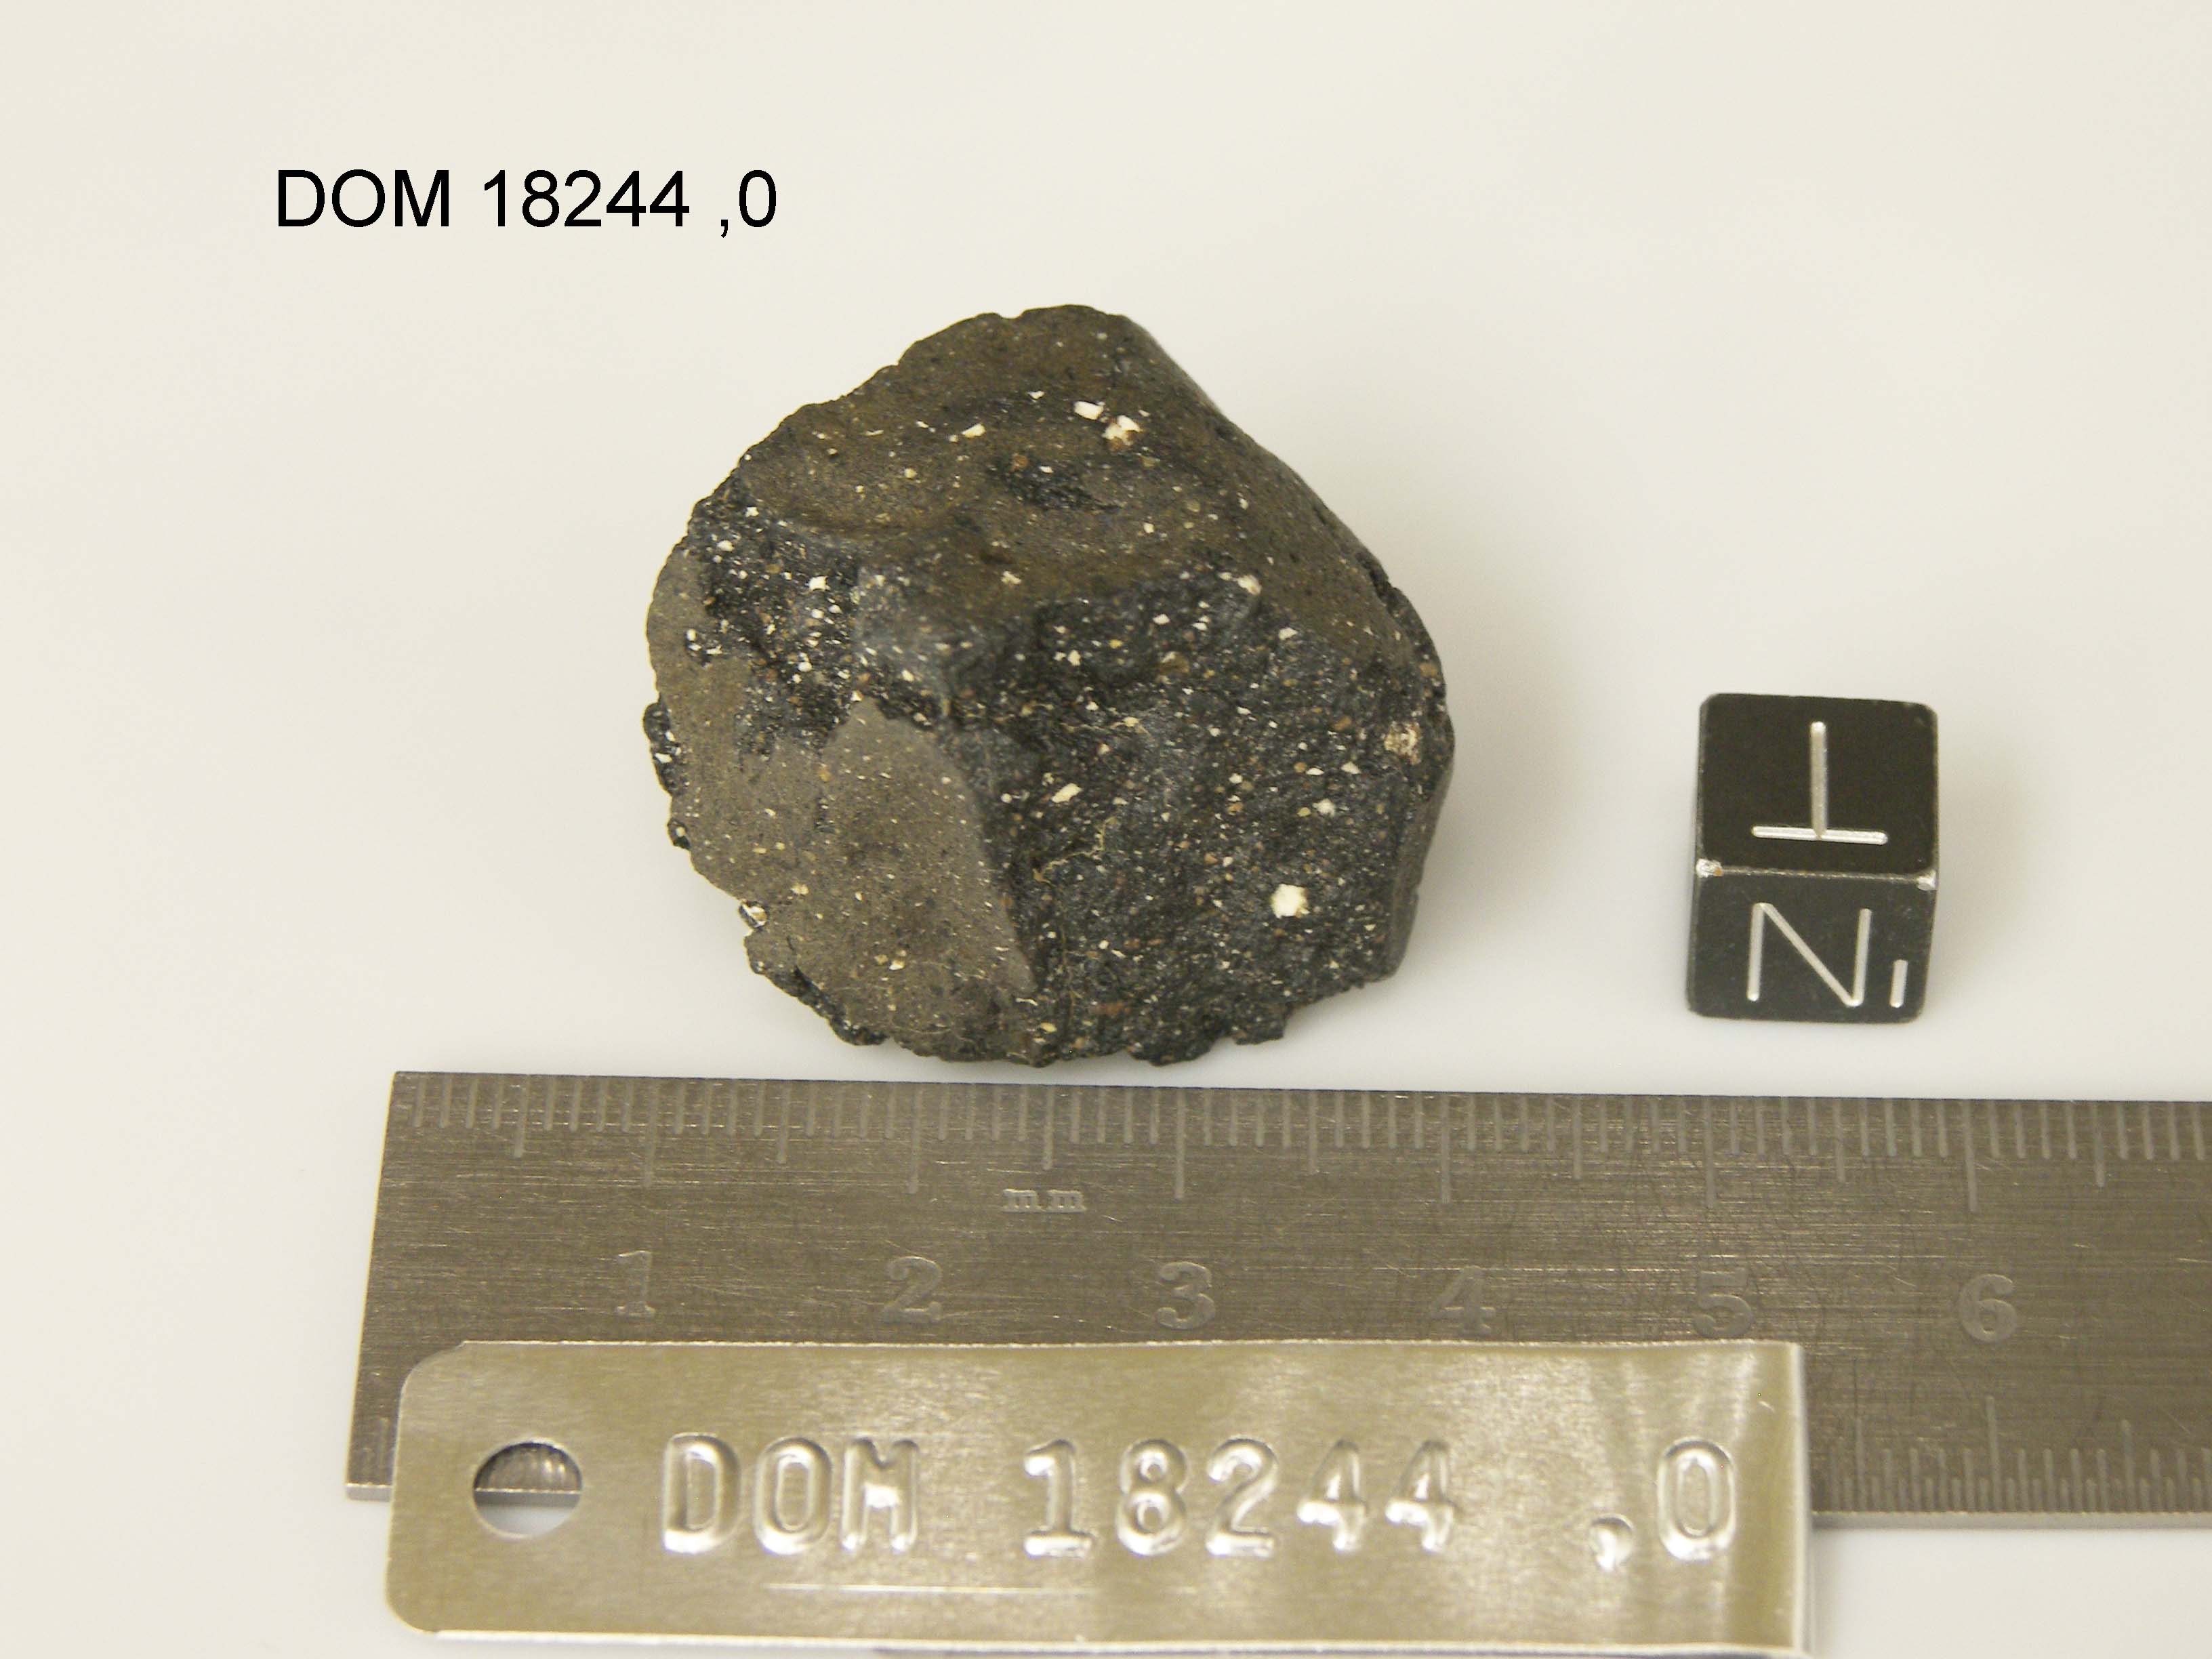 Lab Photo of Sample DOM 18244 Displaying Top North Orientation